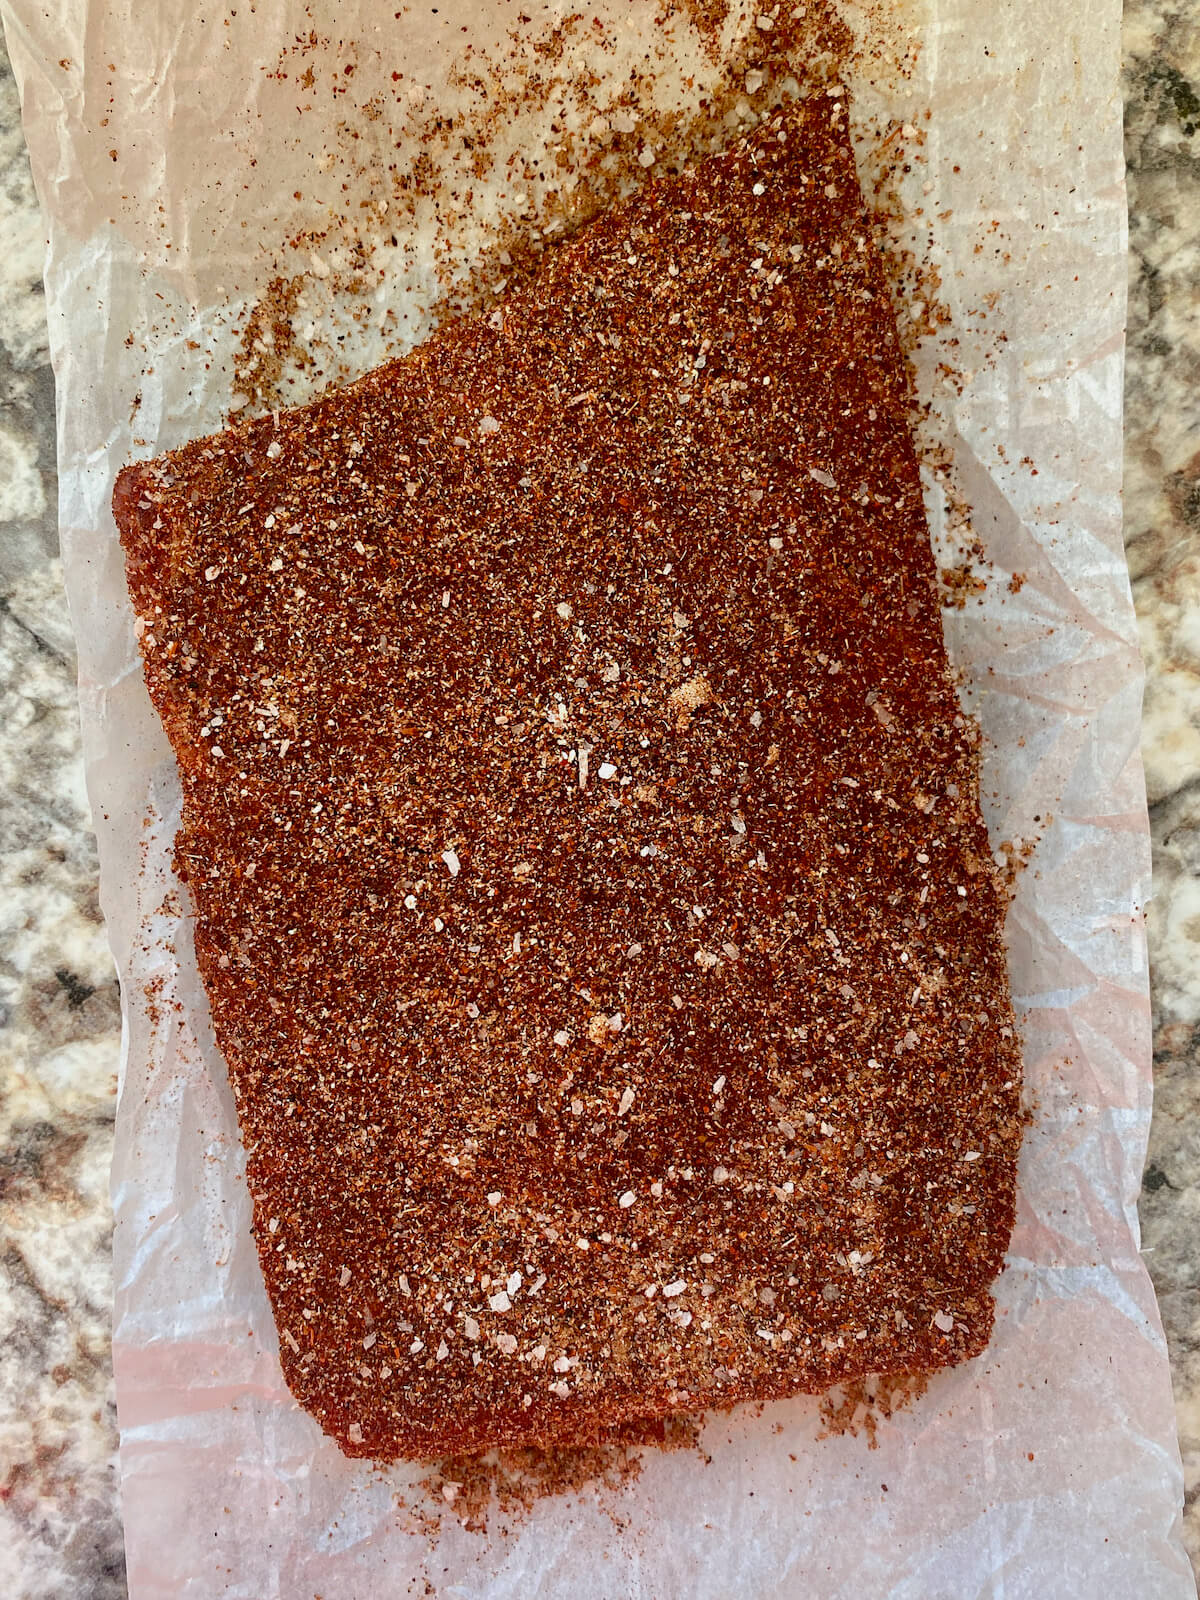 A piece of raw beef coated in fajita seasoning on a piece of parchment paper.